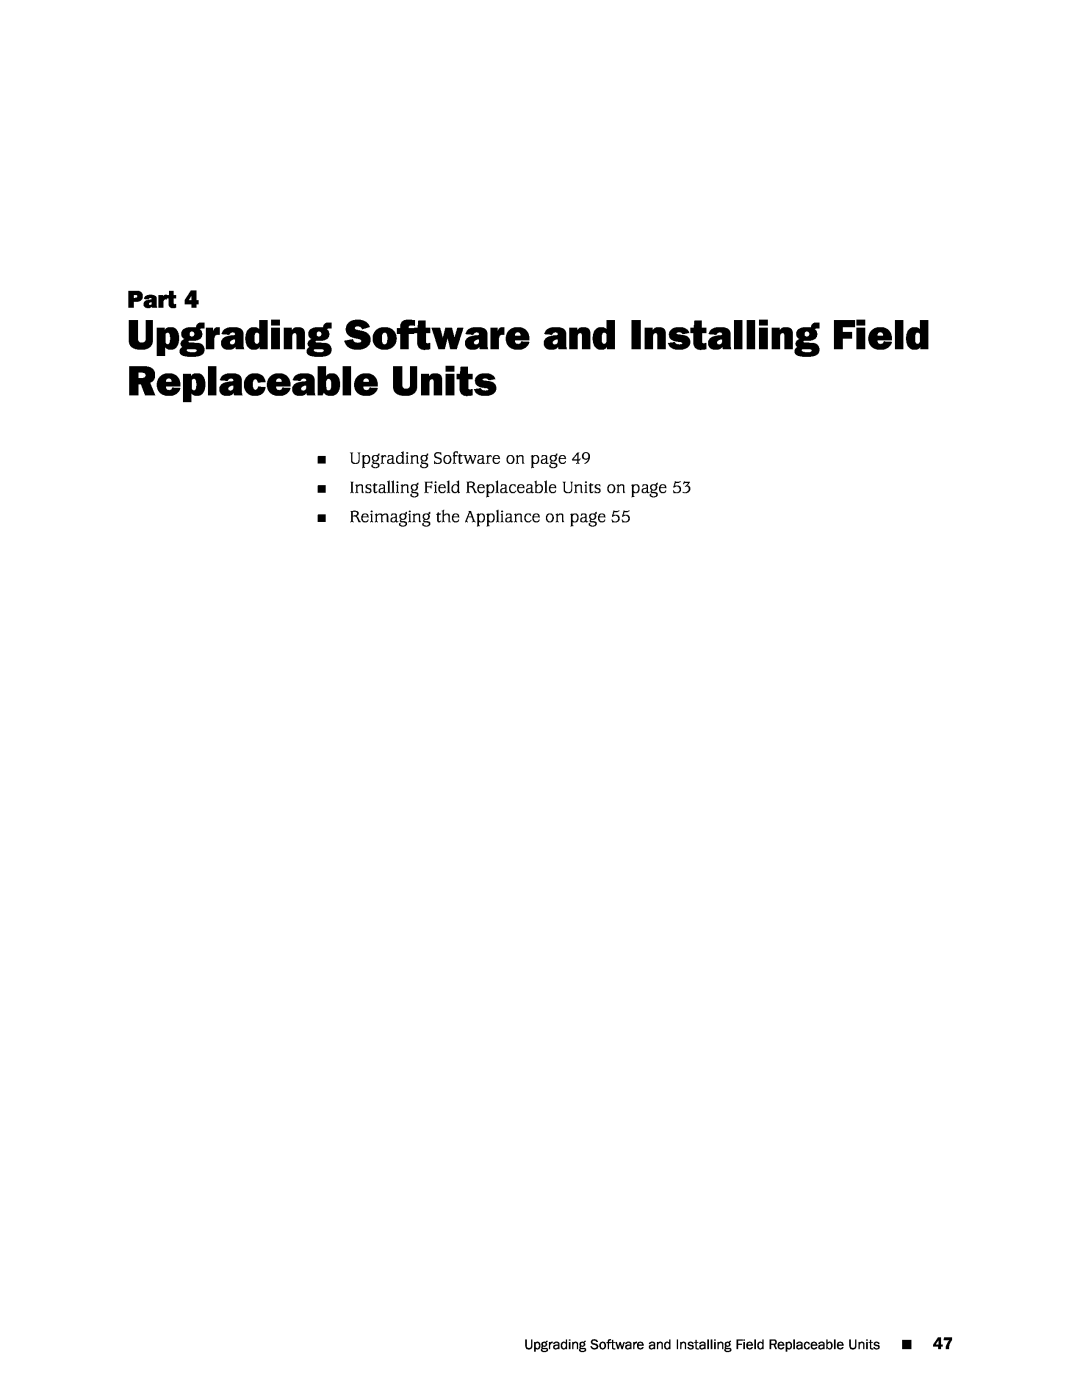 Juniper Networks IDP250 manual Part, Upgrading Software on page, Installing Field Replaceable Units on page 